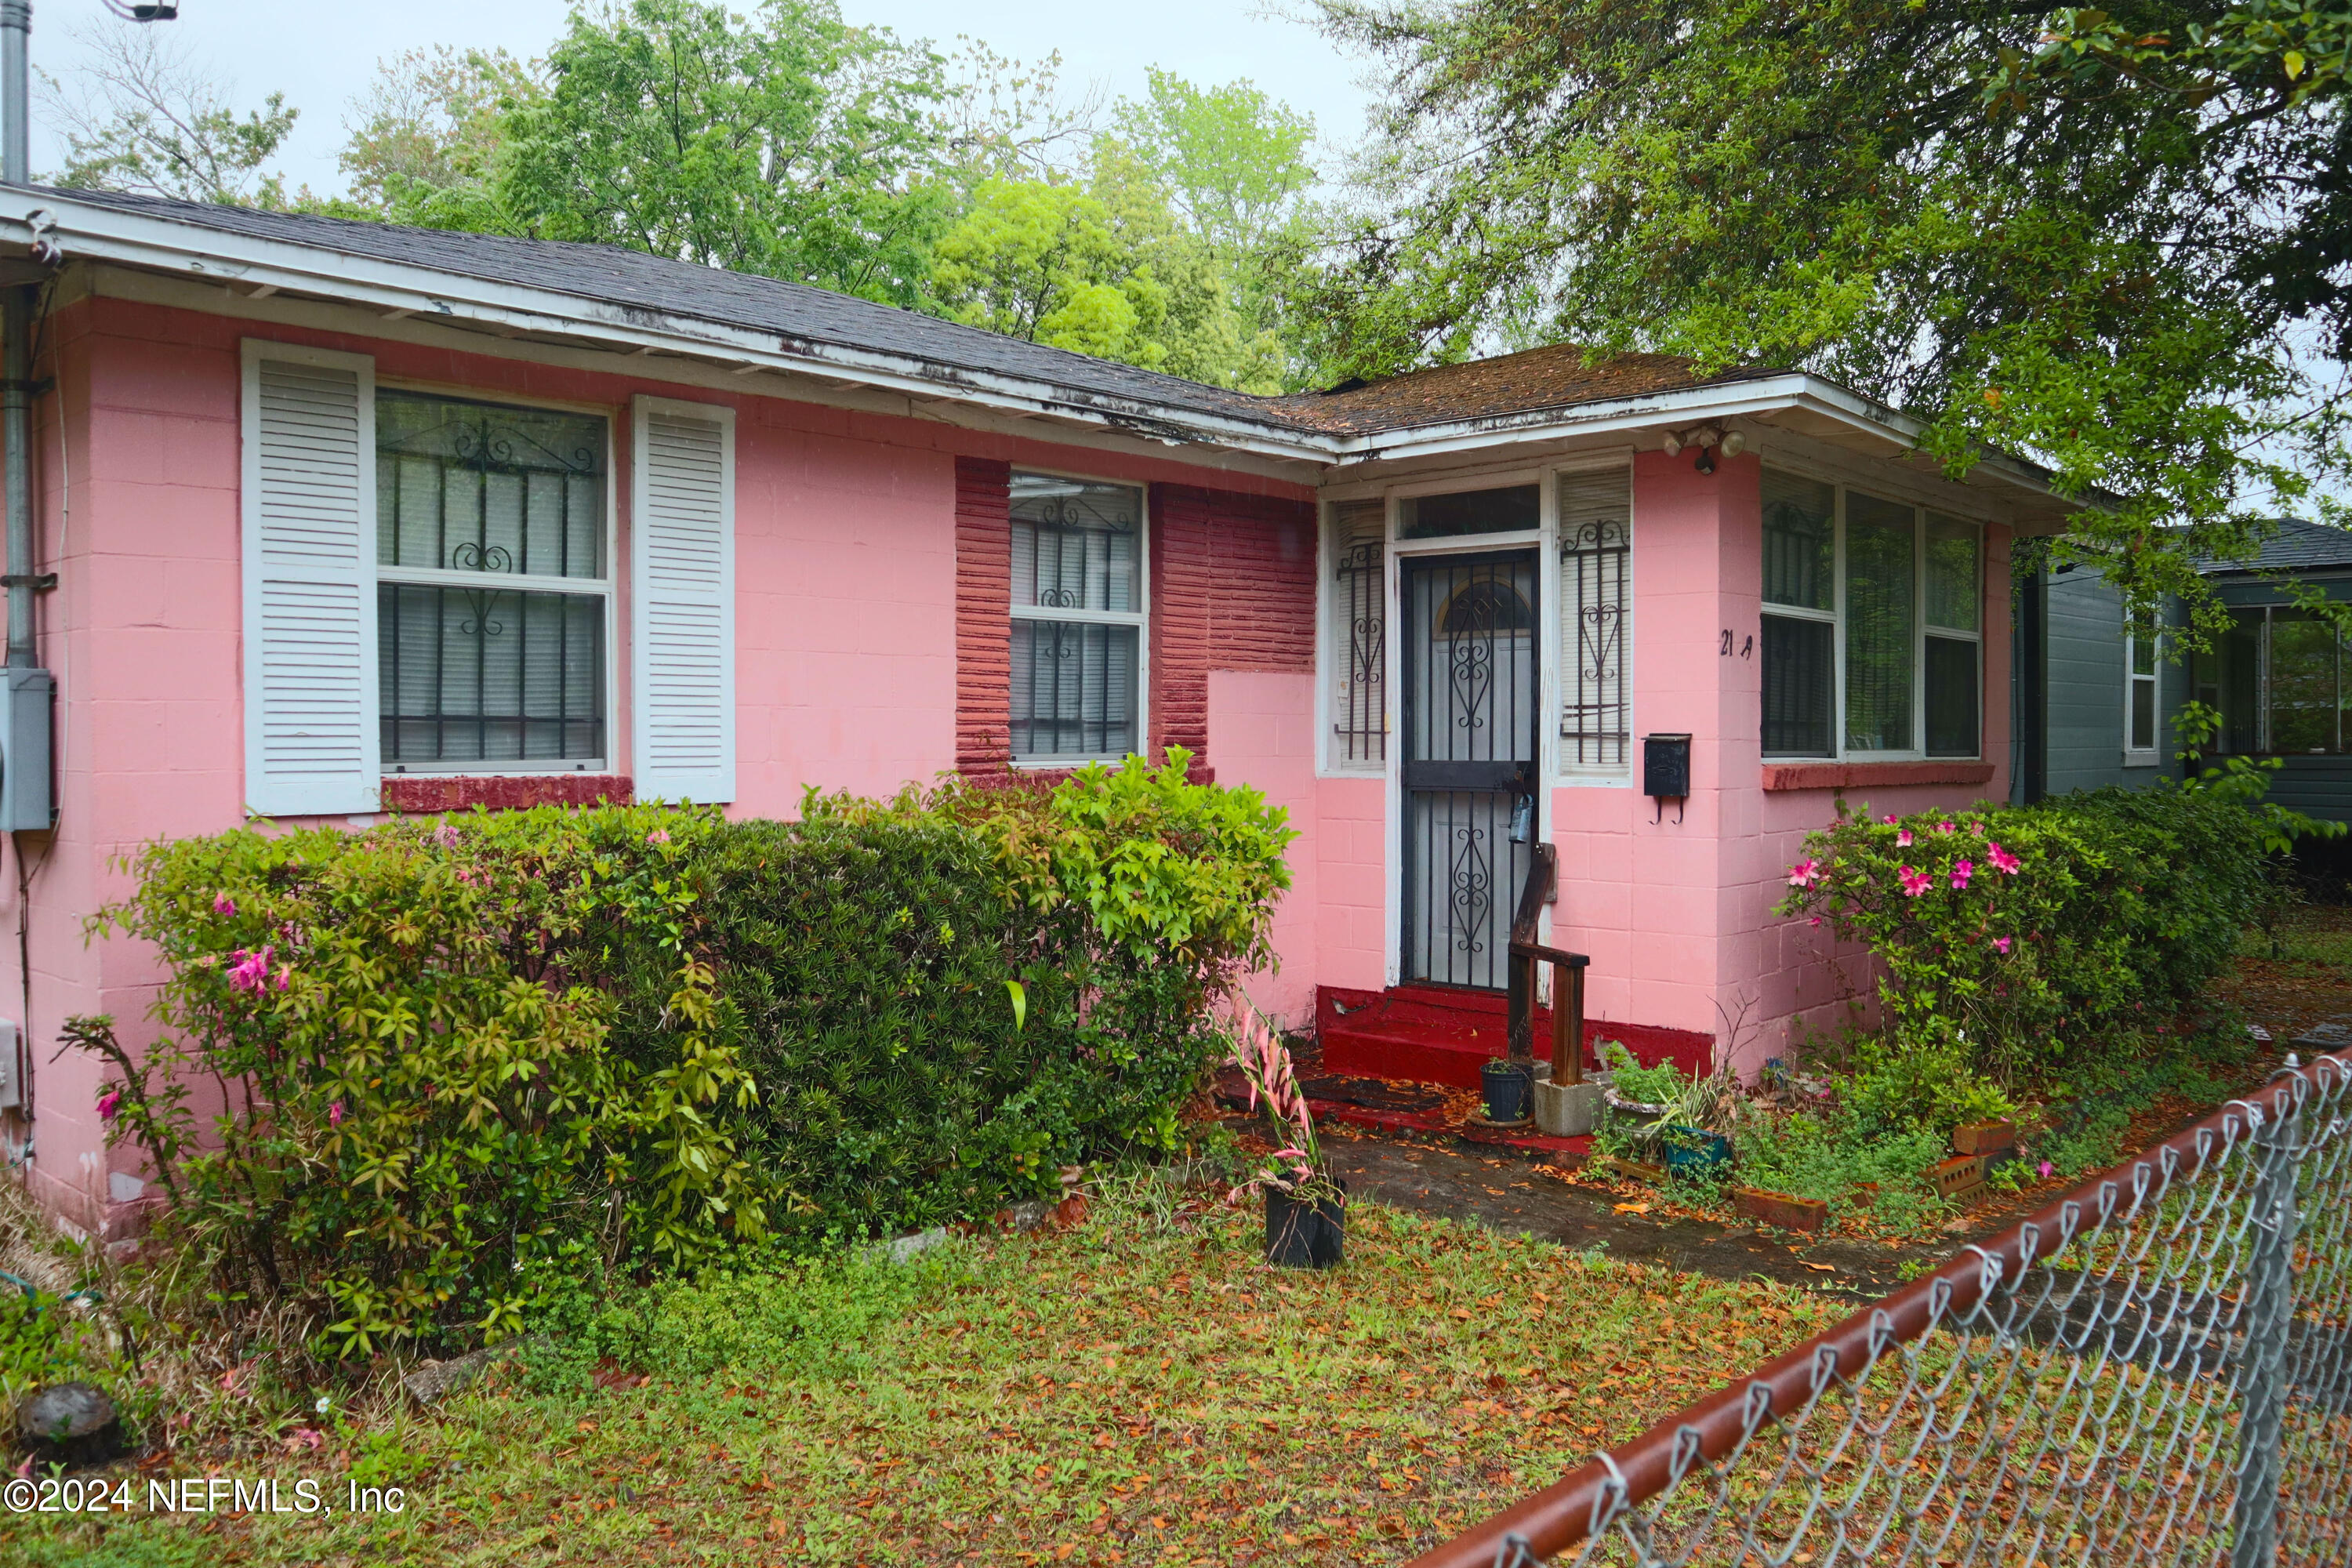 Jacksonville, FL home for sale located at 2119 W 40th Street, Jacksonville, FL 32209